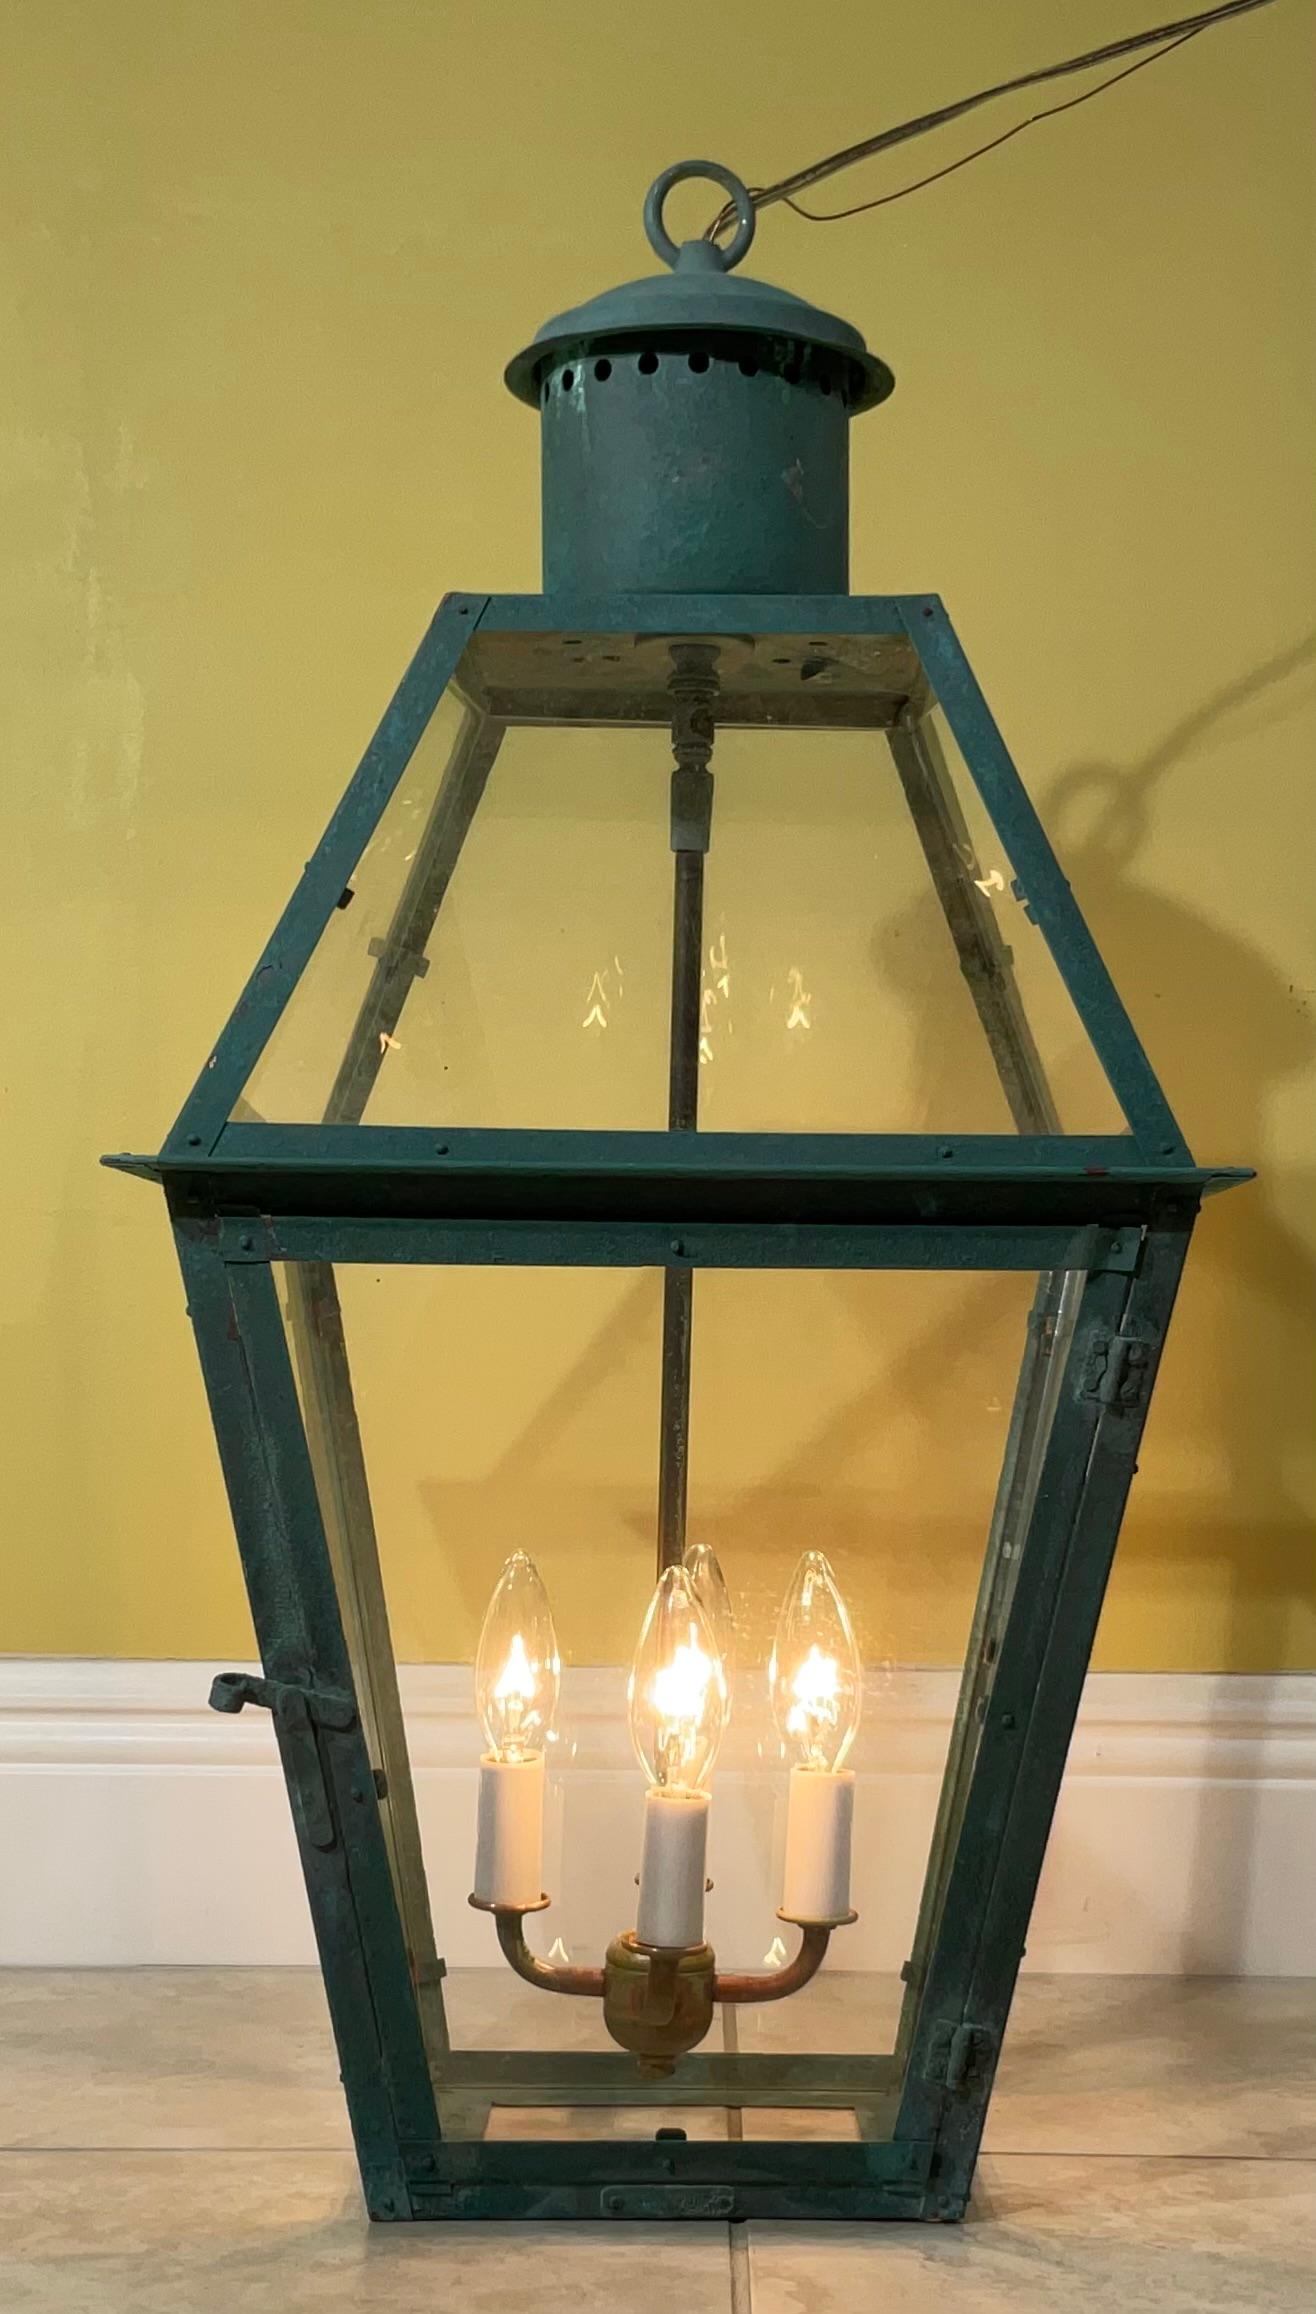 Vintage quality handmade solid copper lantern with four 40/watt watt lights.
Electrified and ready to light. Beautiful oxidization patina.
Could be used in wet location and indoor.
Chain and canopy included.